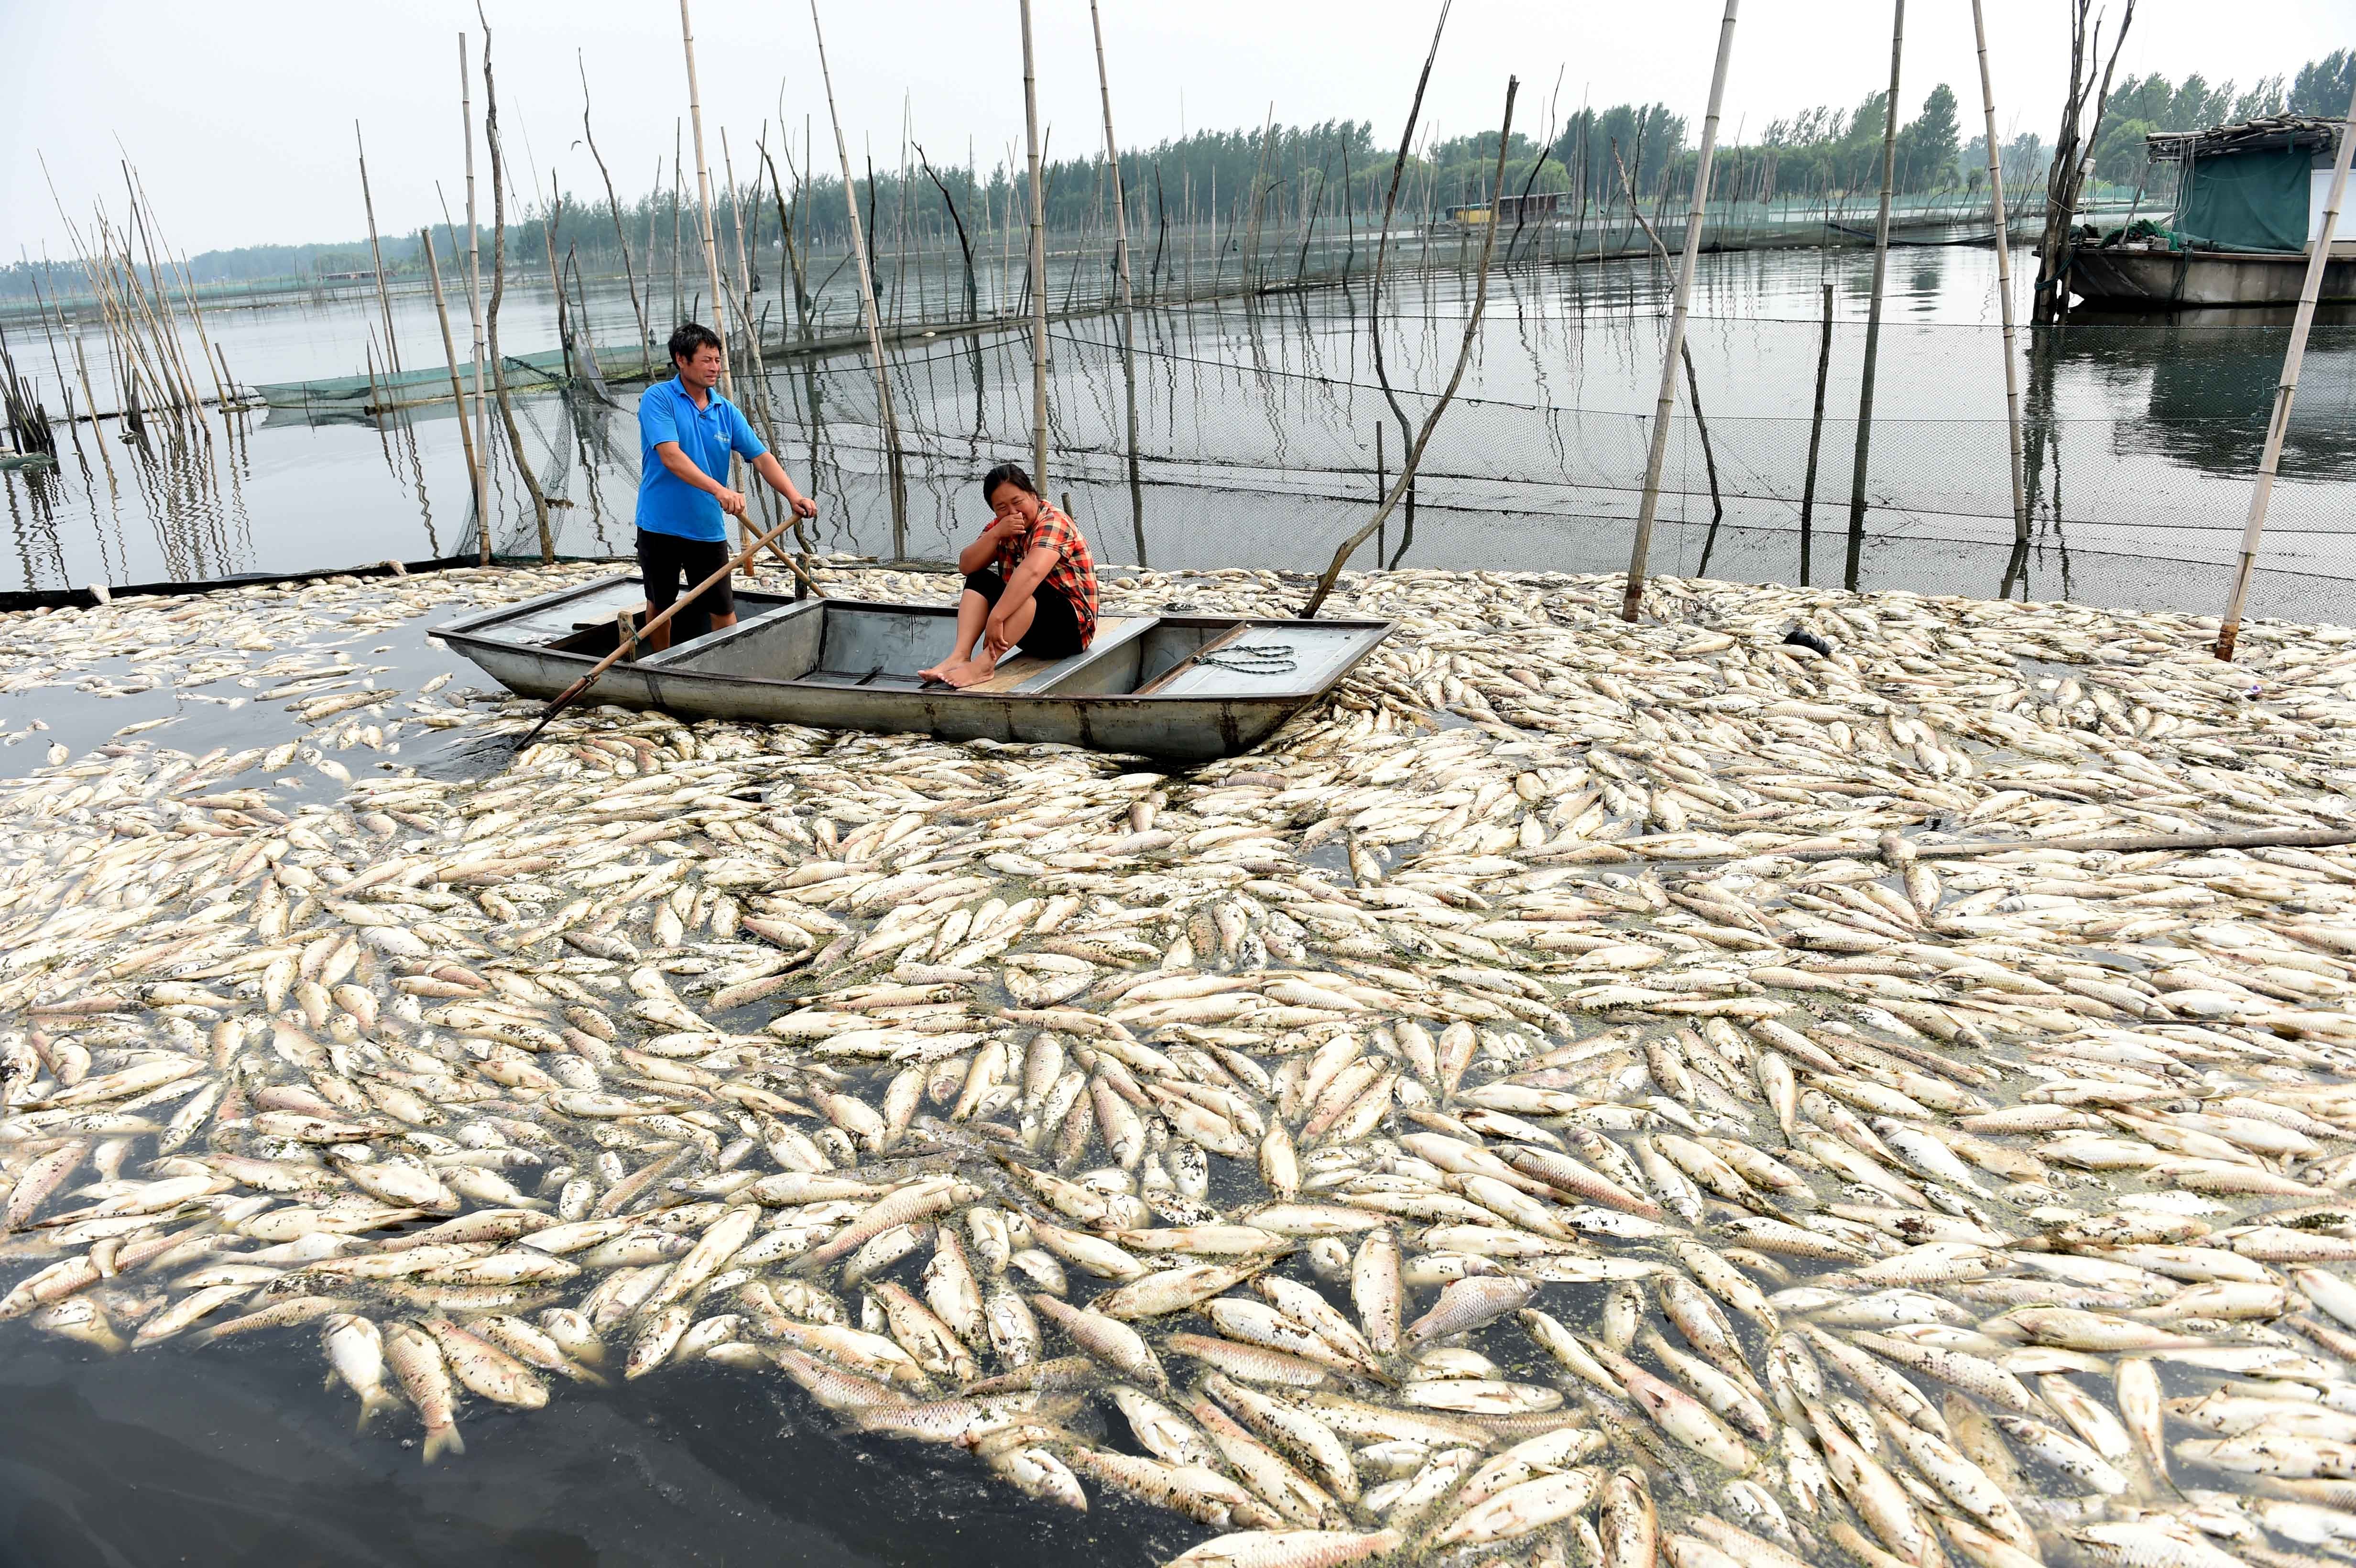 Fish killed by water pollution float on Tuo lake in Wuhe county of Anhui province in July 2015. Photo: Xinhua